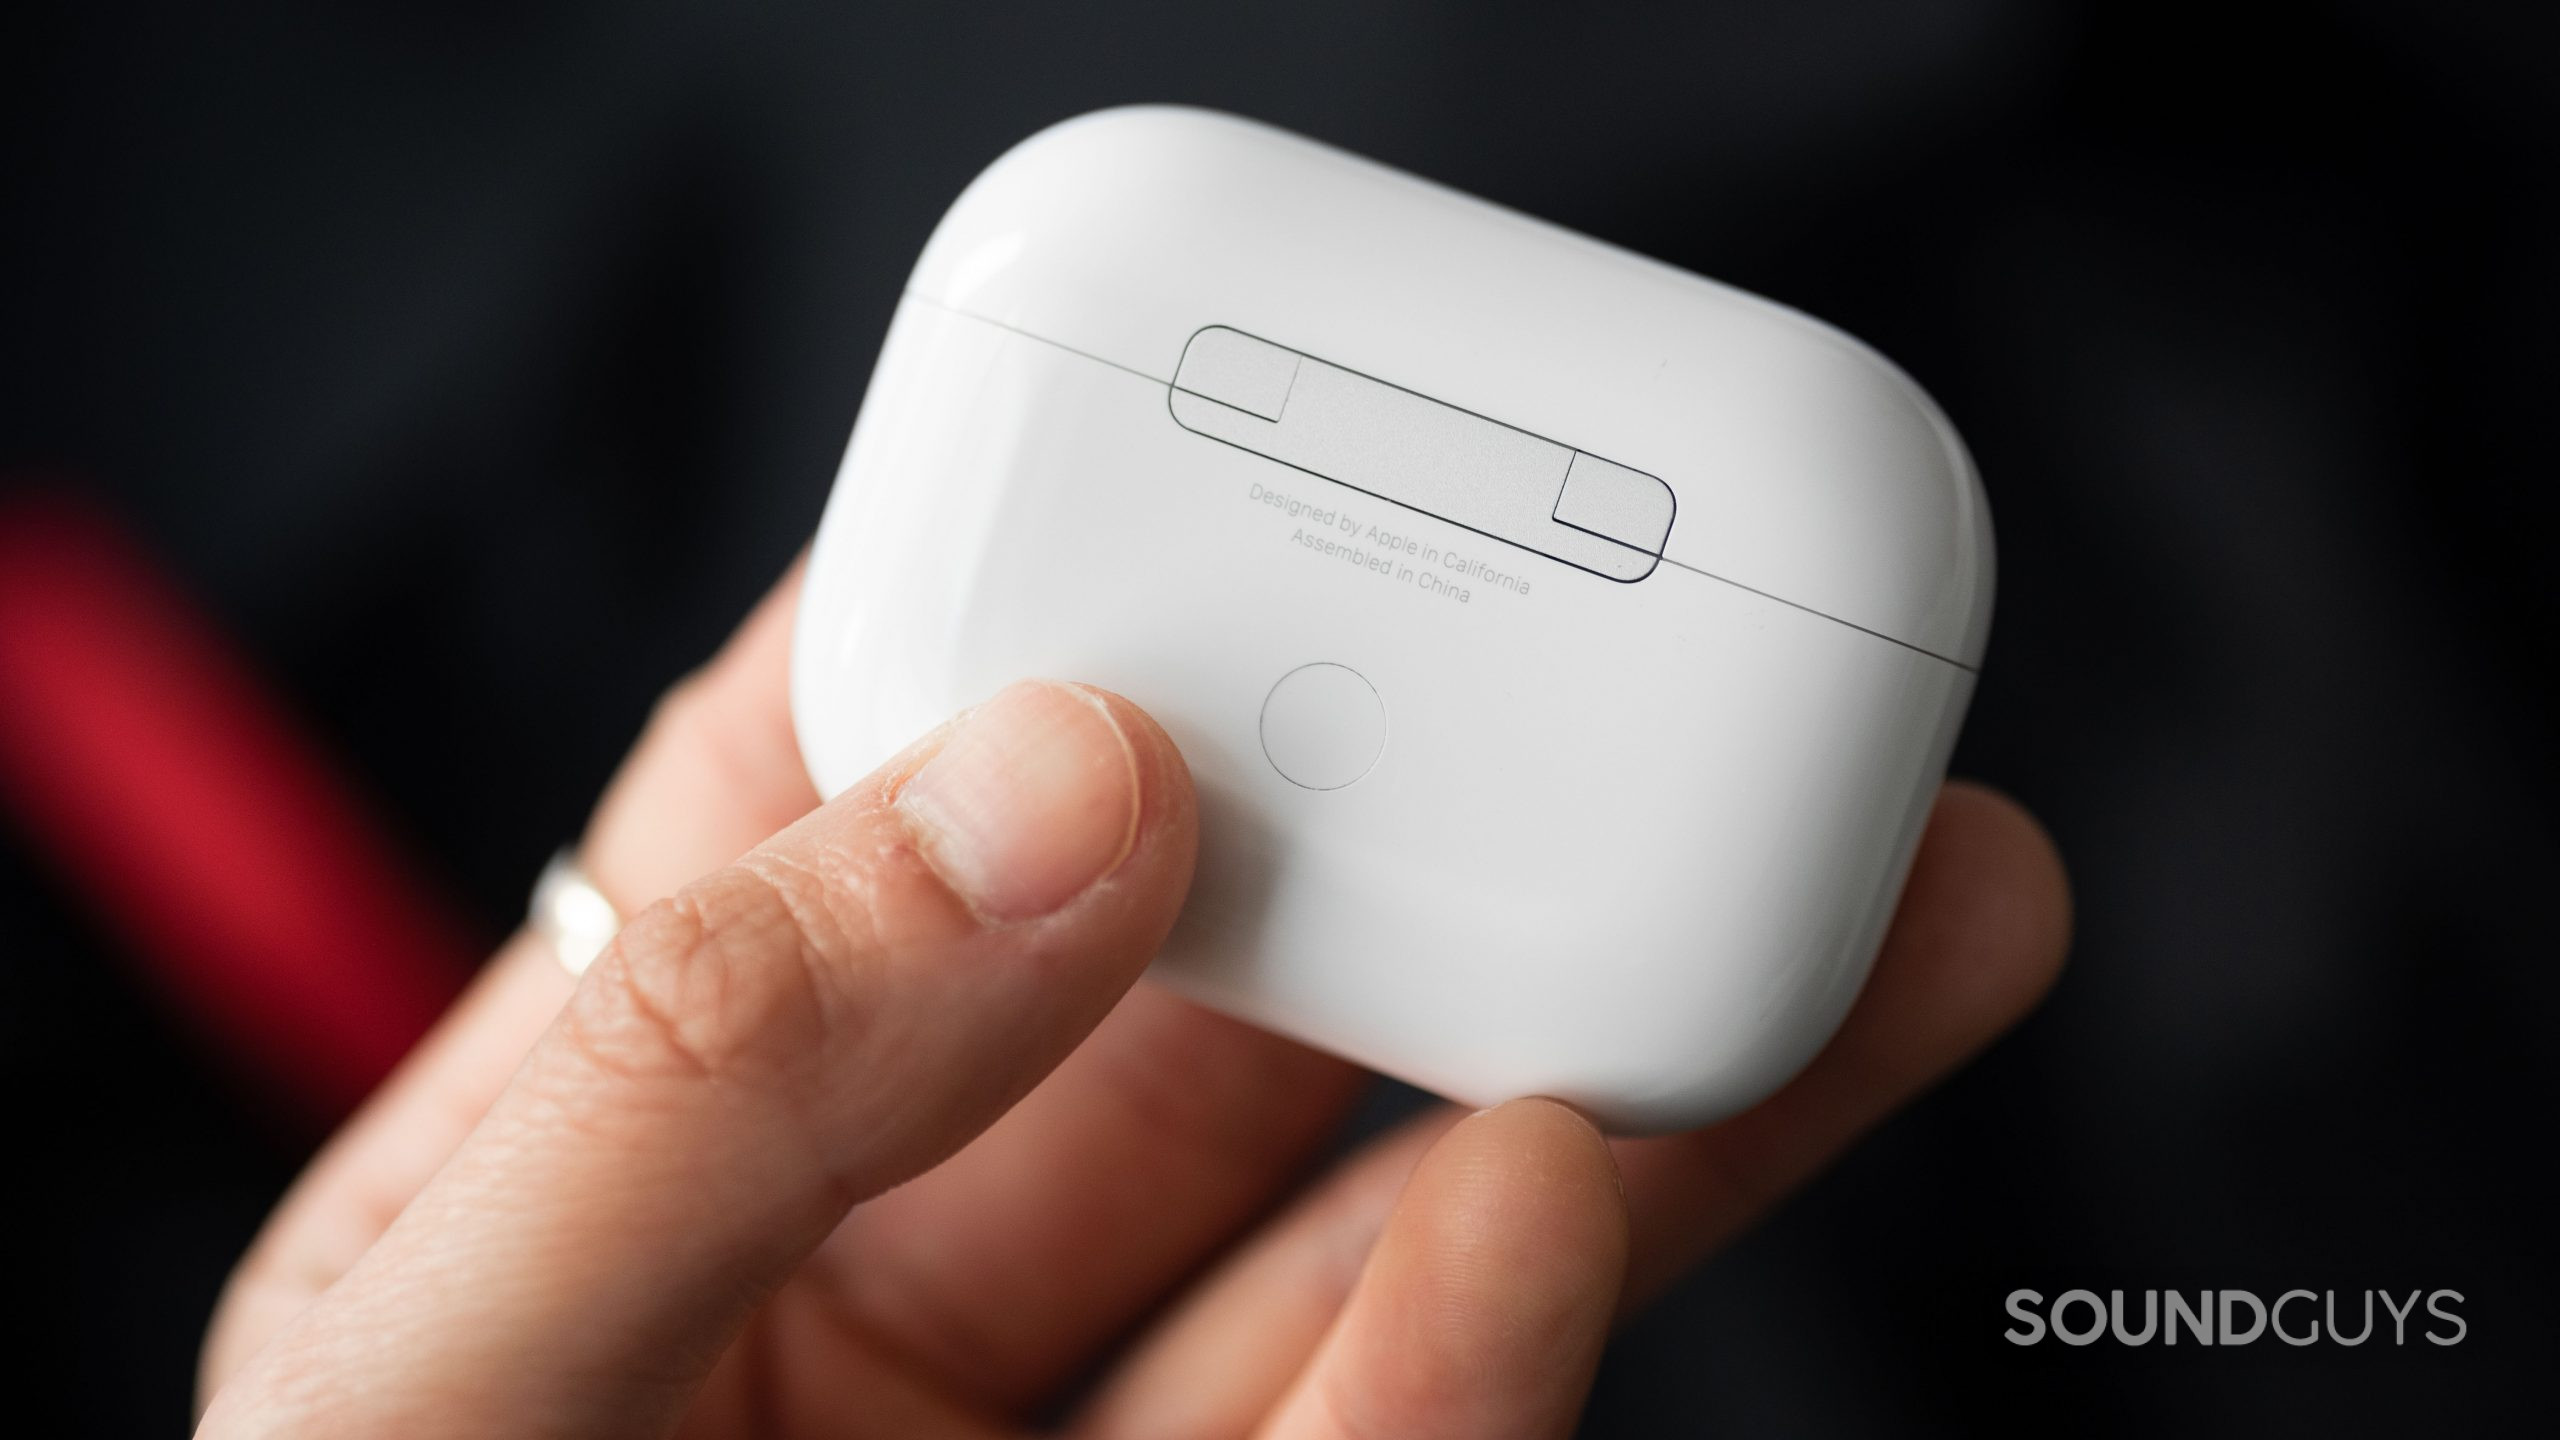 Only one of your AirPods working? Here's how to fix it SoundGuys